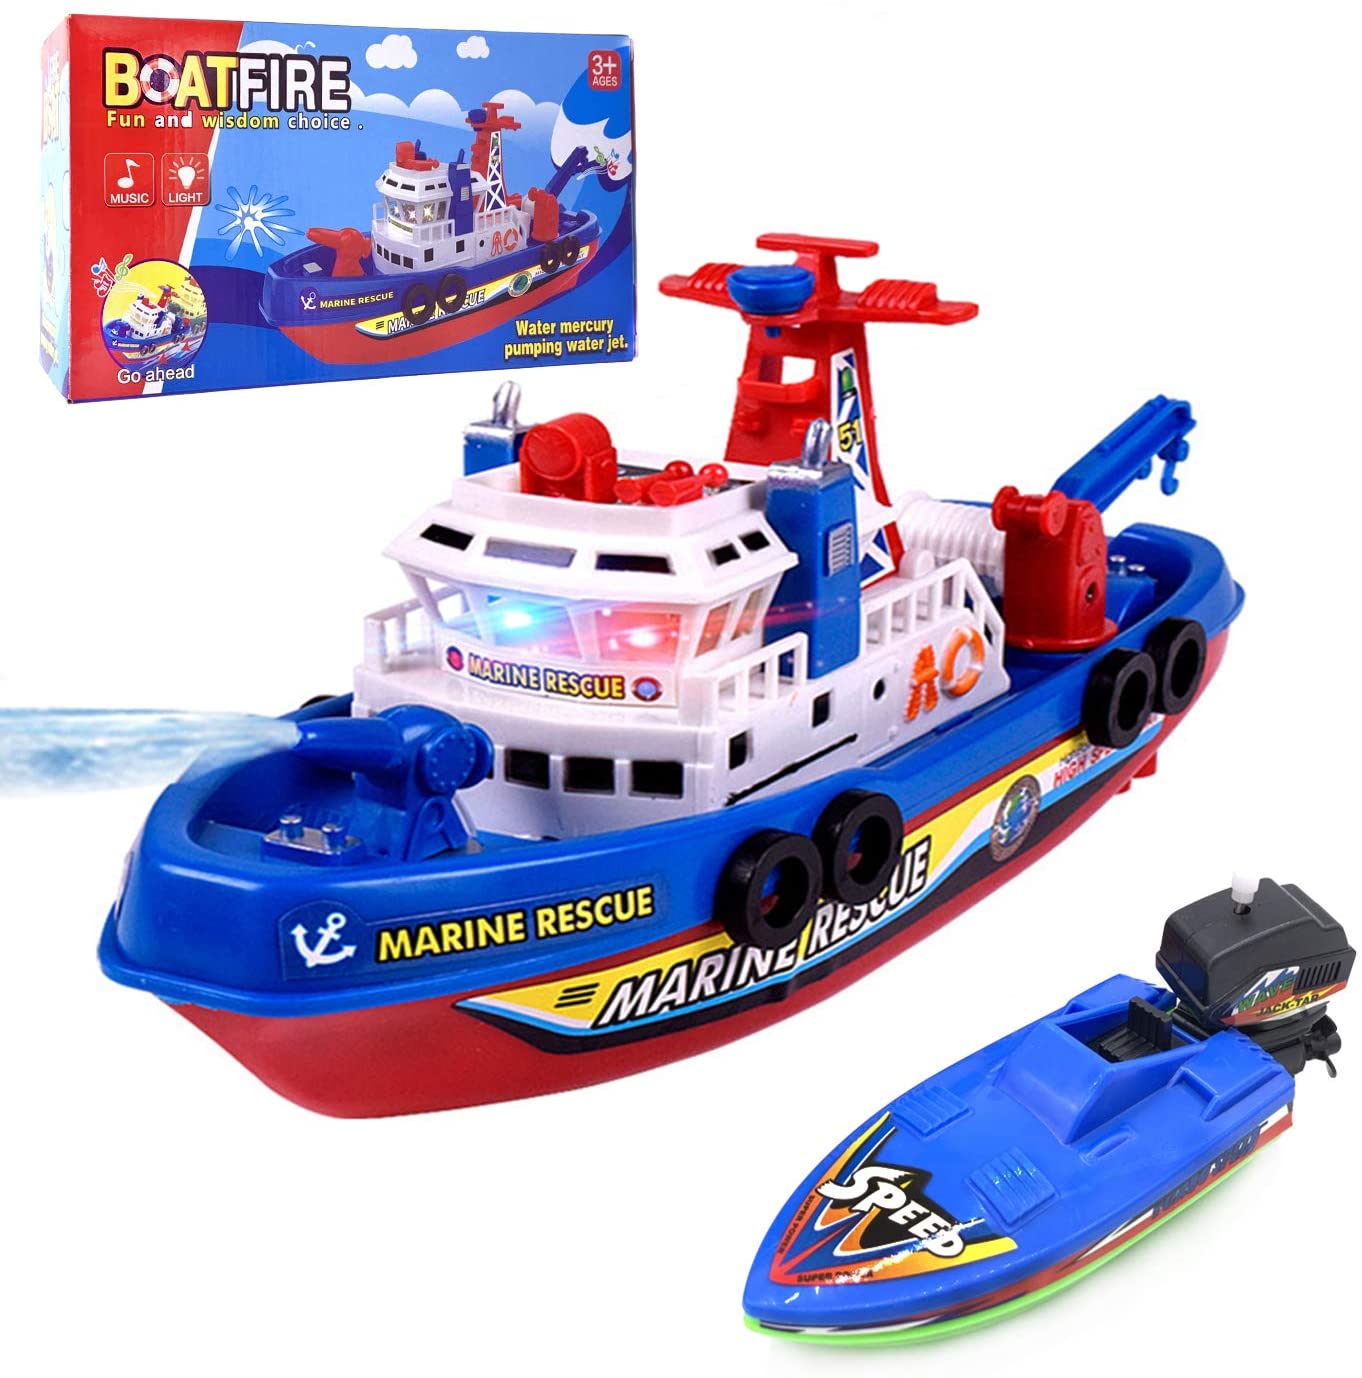 

Sound Toys Children Electric High Speed Music Light Boat Marine Rescue Model Fireboat Toys For Boys Water Spray Fire Educational Toy